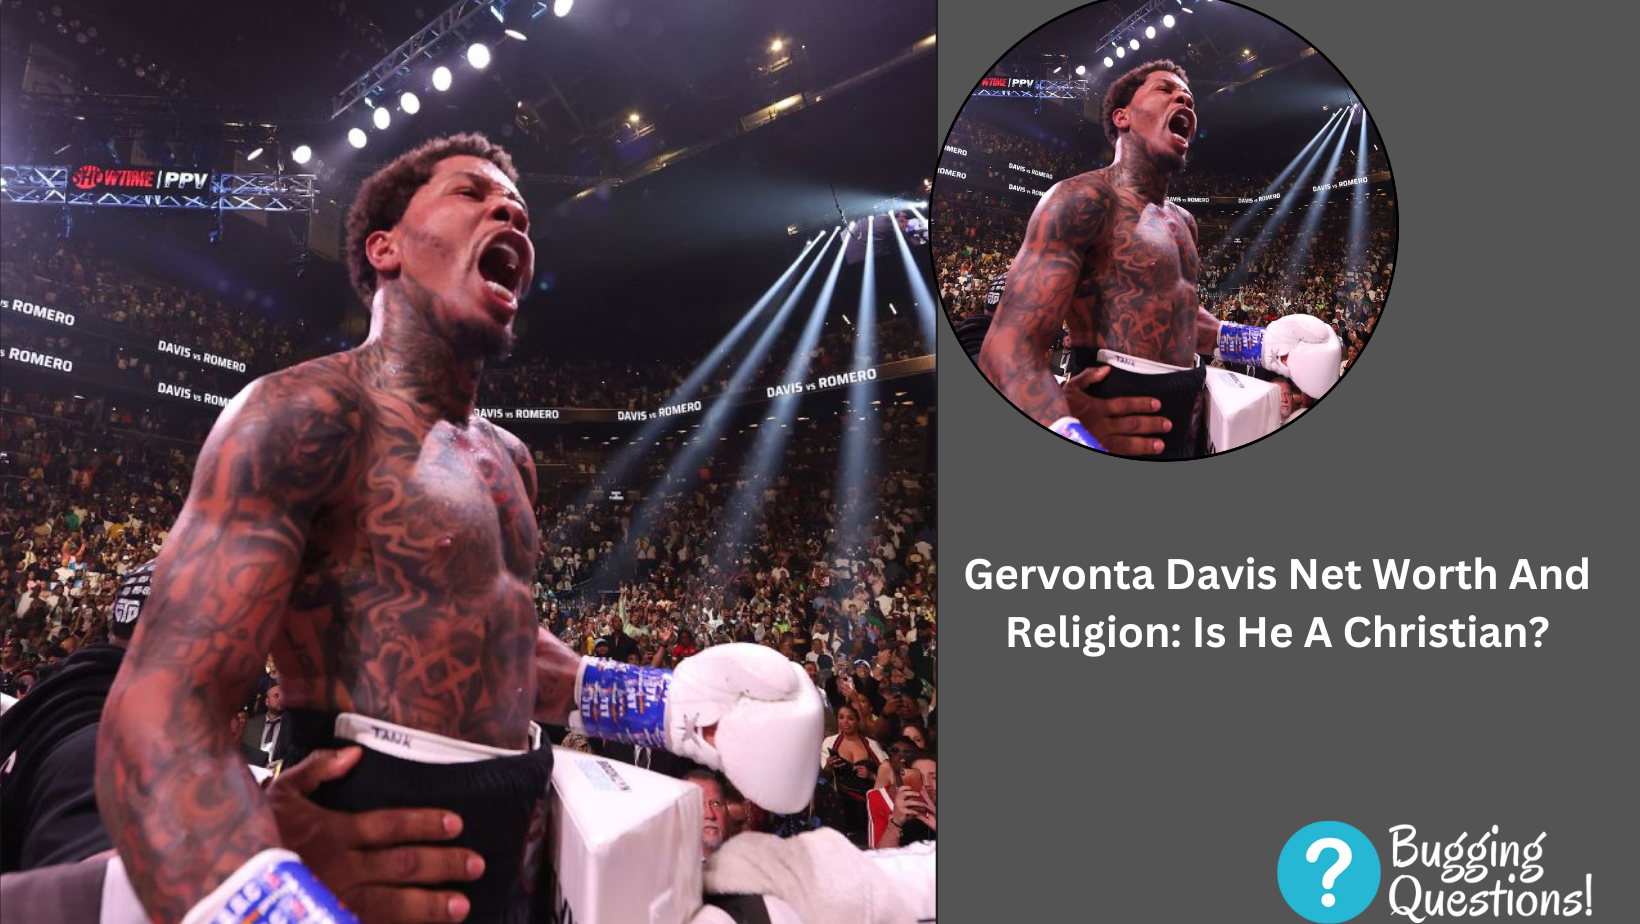 Gervonta Davis Net Worth And Religion: Is He A Christian?